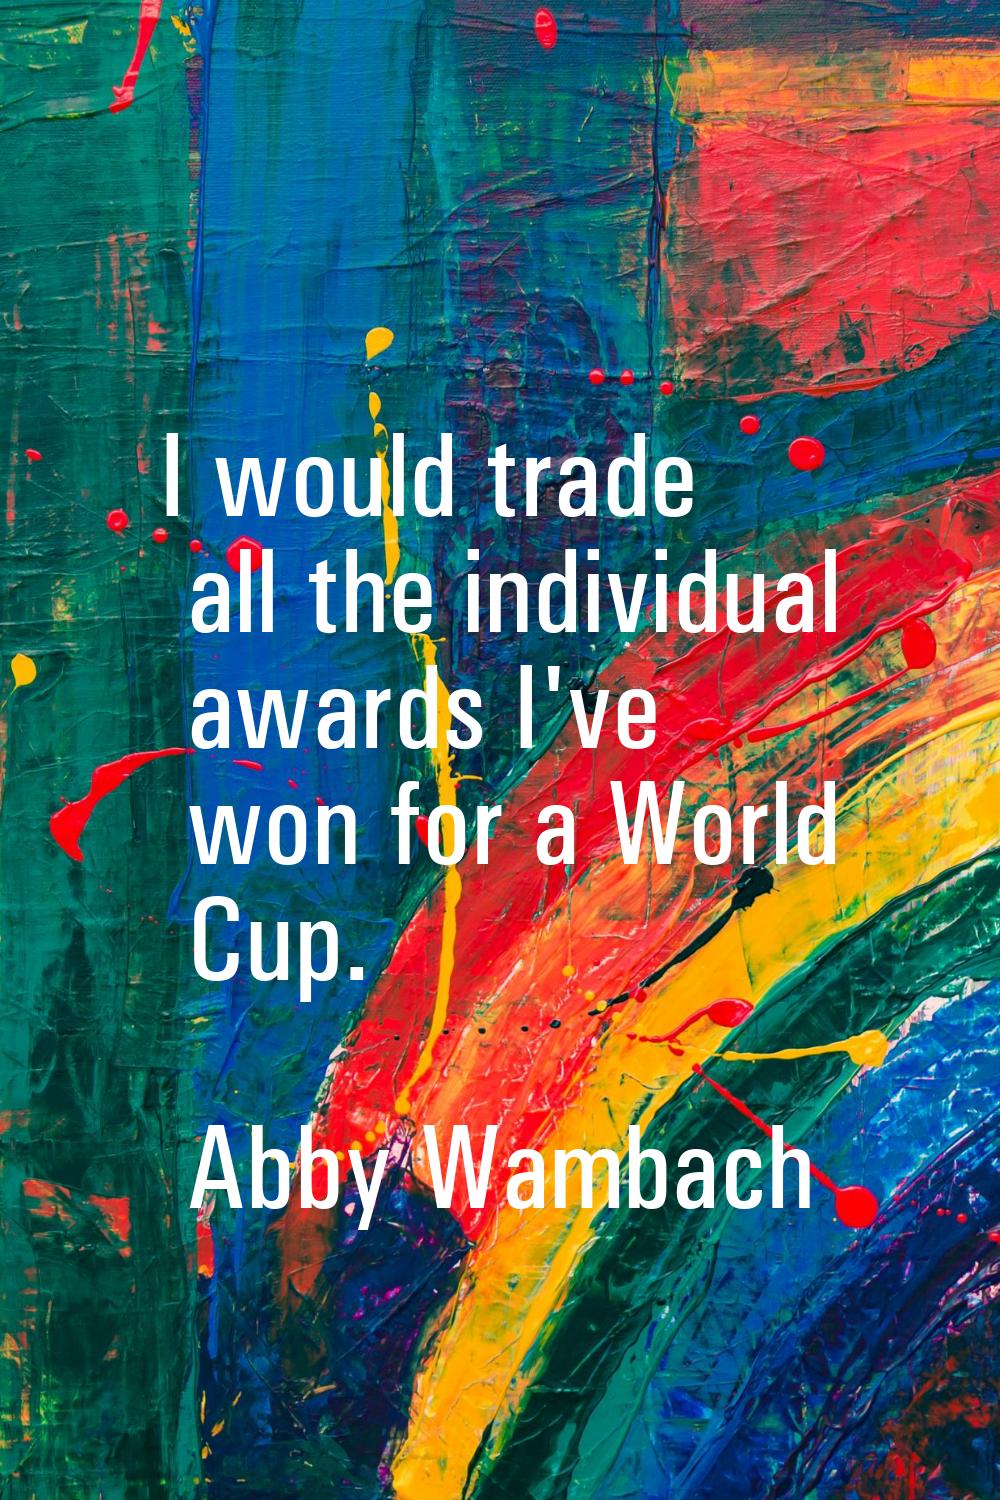 I would trade all the individual awards I've won for a World Cup.